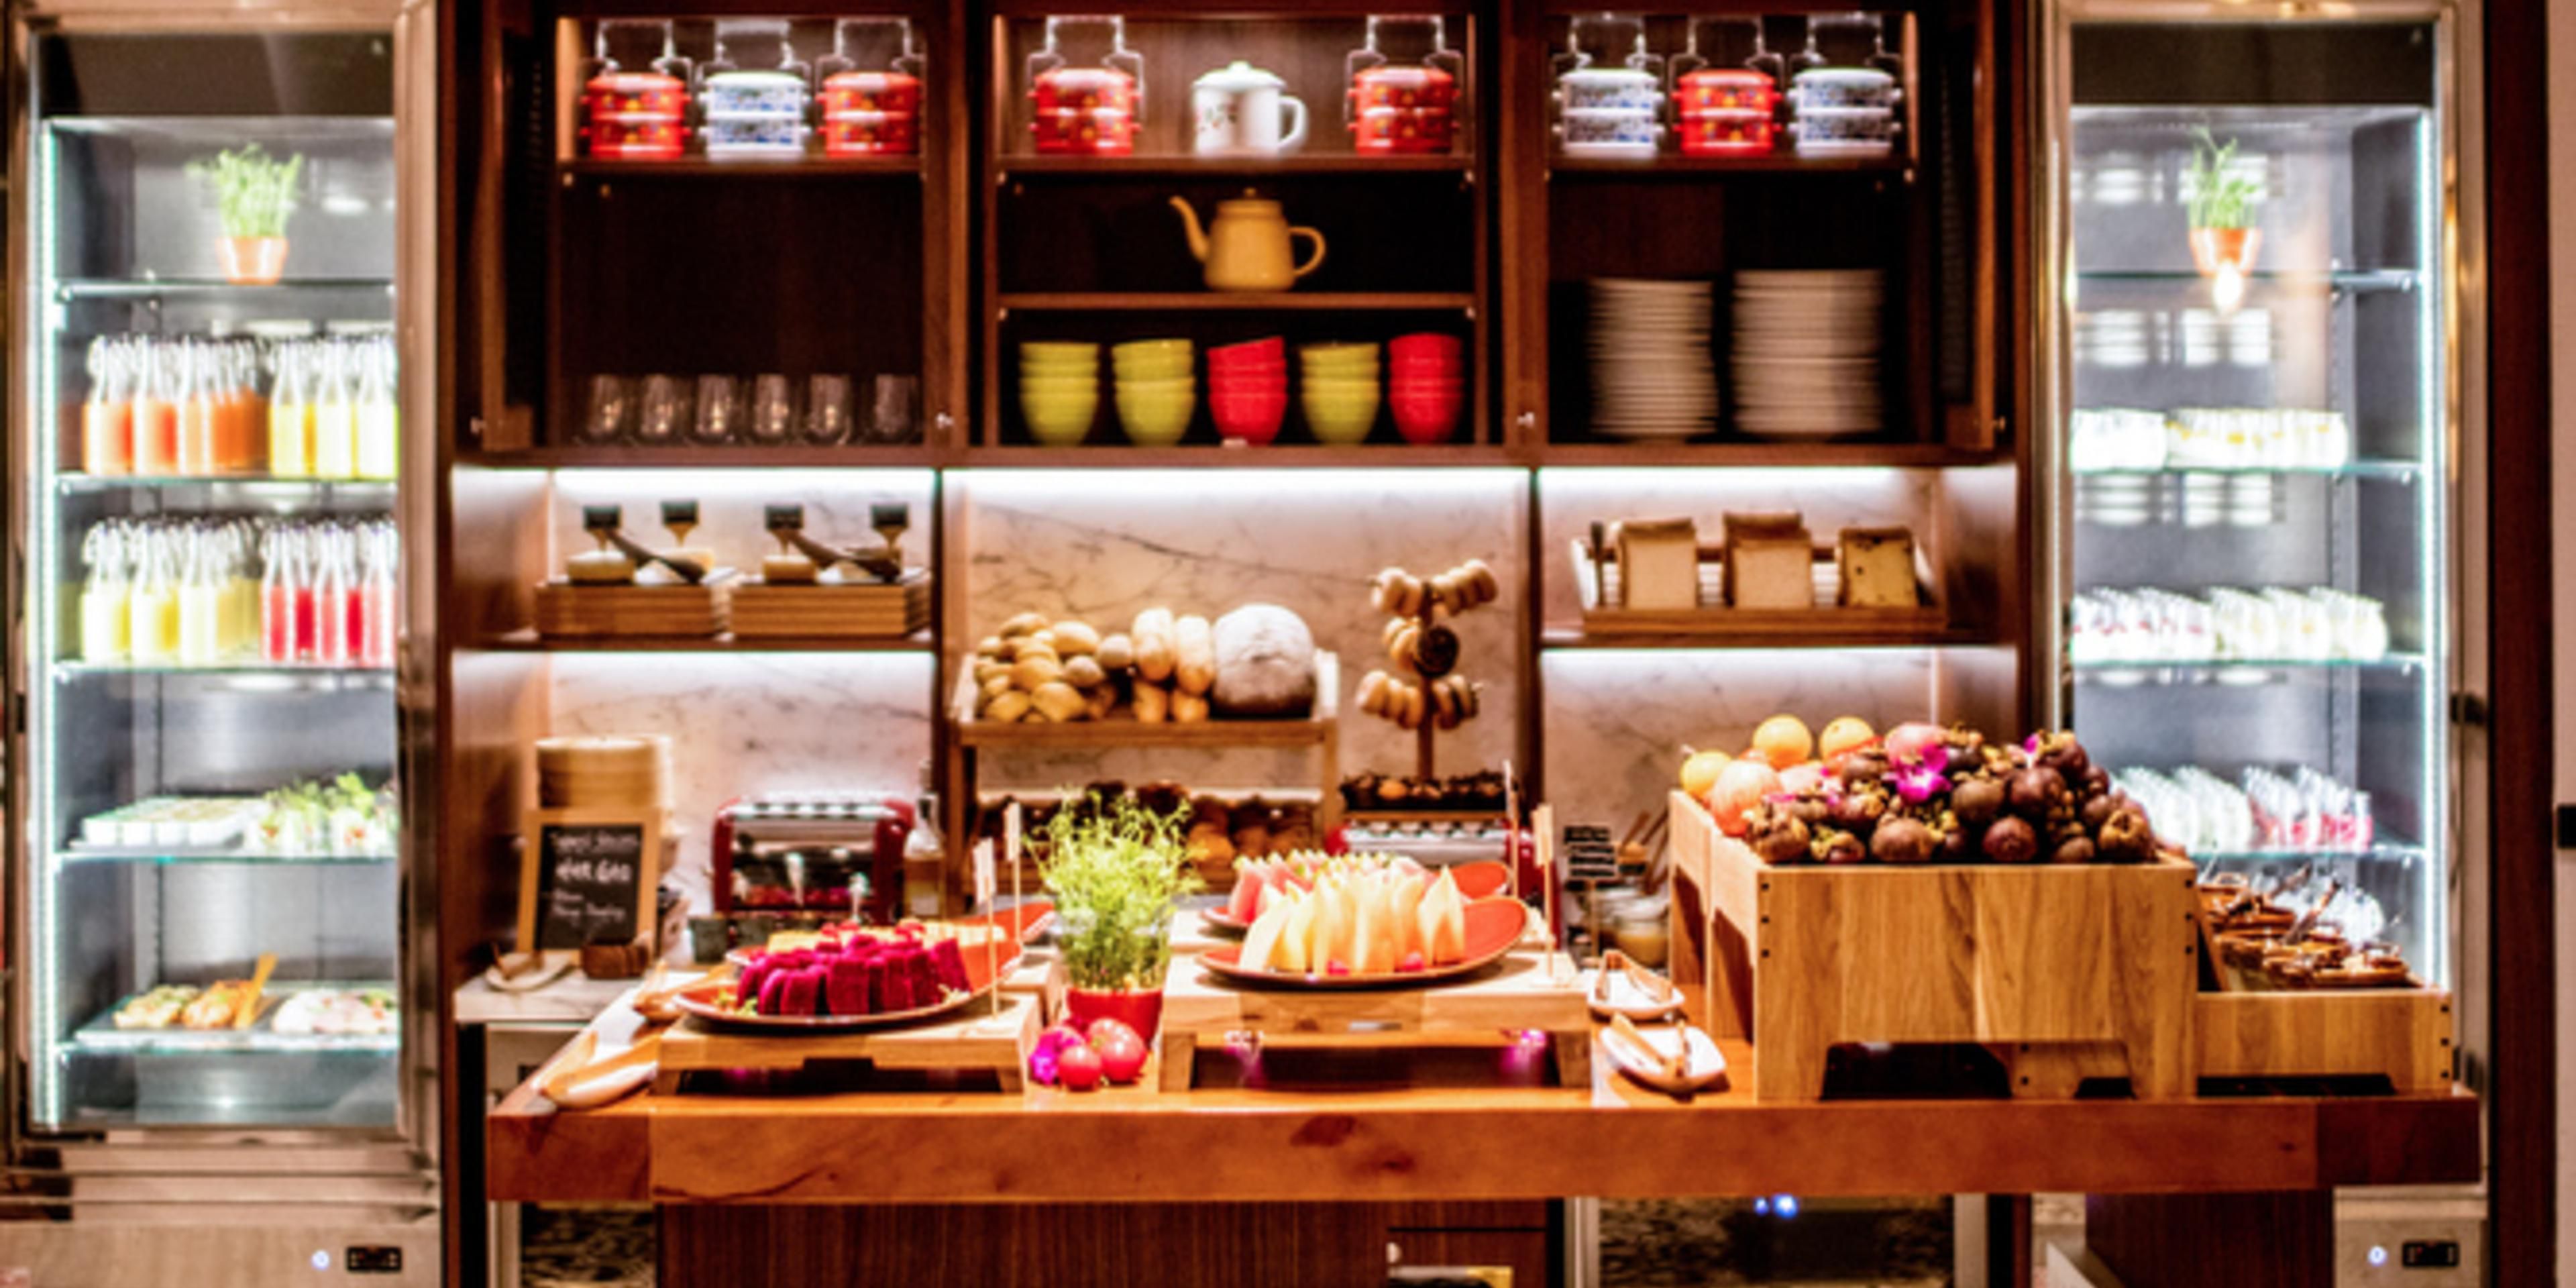 Continental breakfast pantry at Baba Chews Bar and Eatery